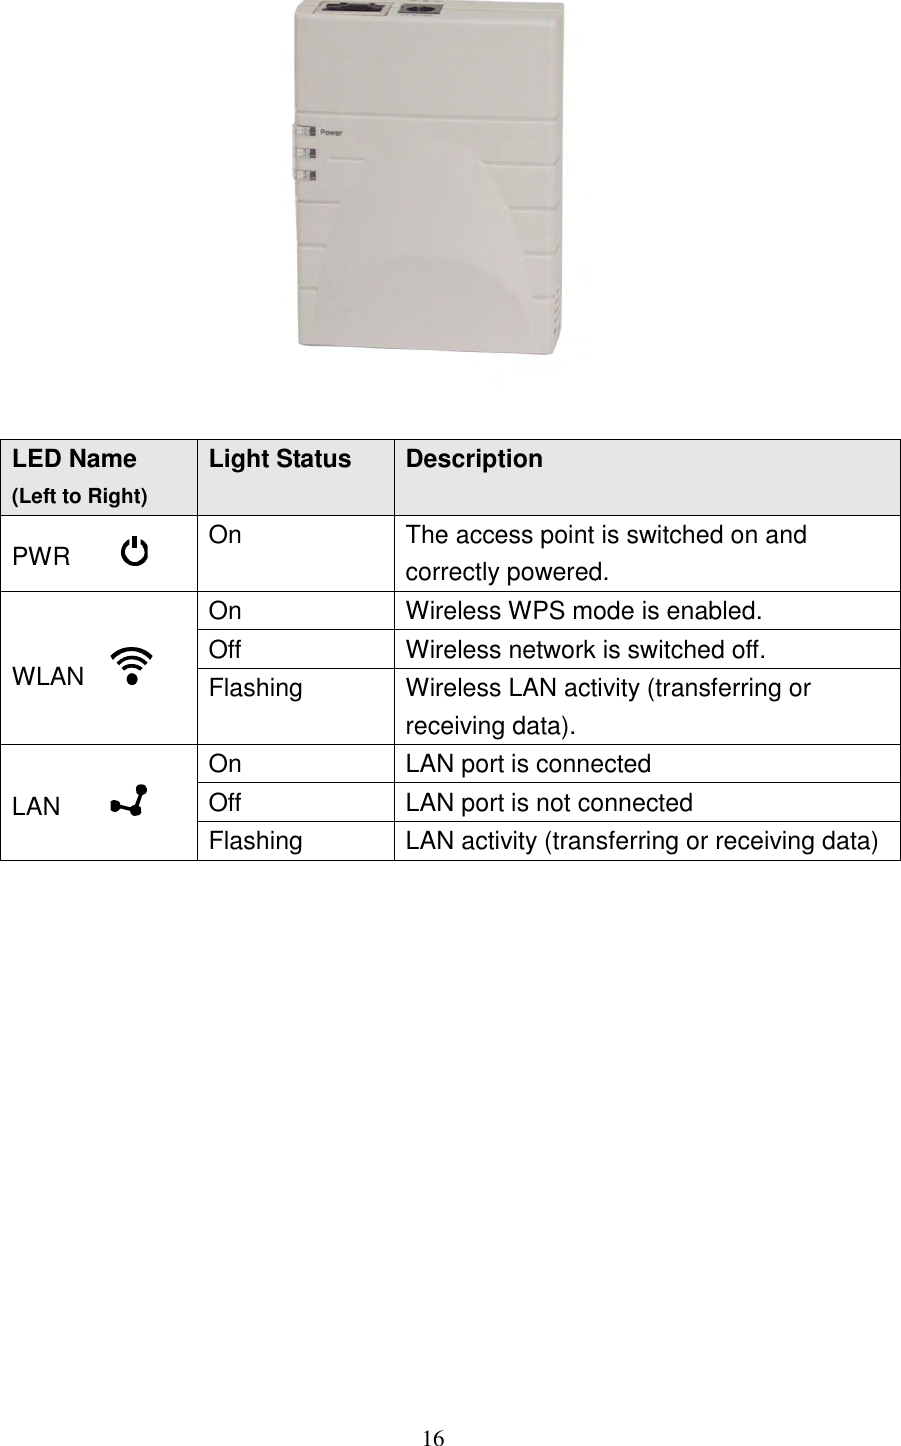 16   LED Name (Left to Right) Light Status Description PWR         On The access point is switched on and correctly powered. WLAN     On Wireless WPS mode is enabled. Off Wireless network is switched off. Flashing Wireless LAN activity (transferring or receiving data). LAN         On LAN port is connected Off LAN port is not connected Flashing LAN activity (transferring or receiving data)              